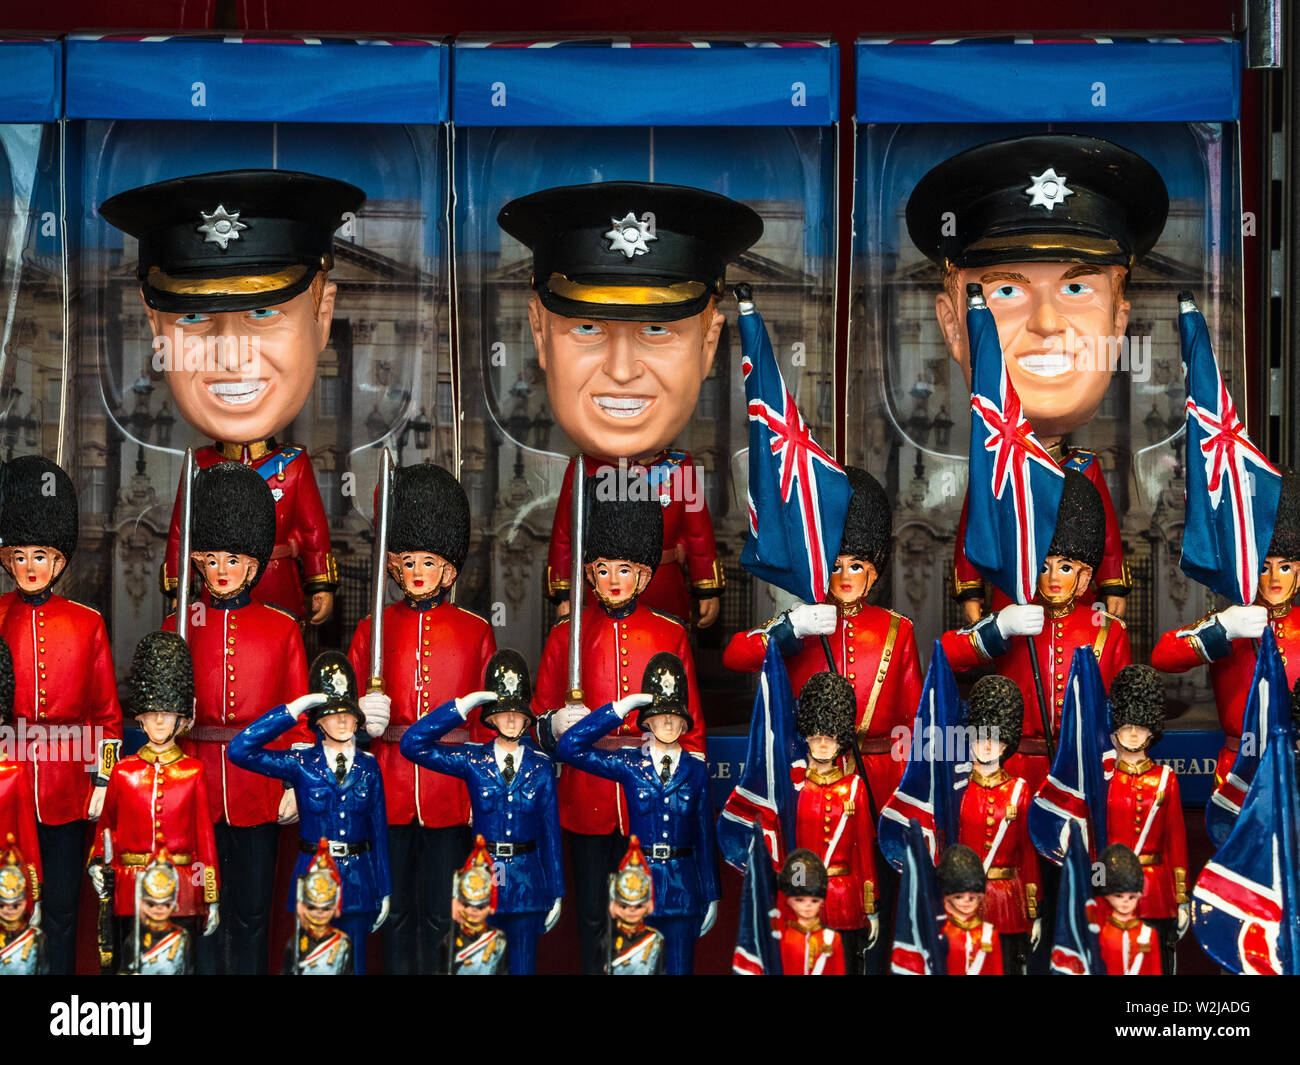 Prince William Model. The Royal Family - Prince William toys and souvenirs for sale in a London Souvenir Shop Stock Photo